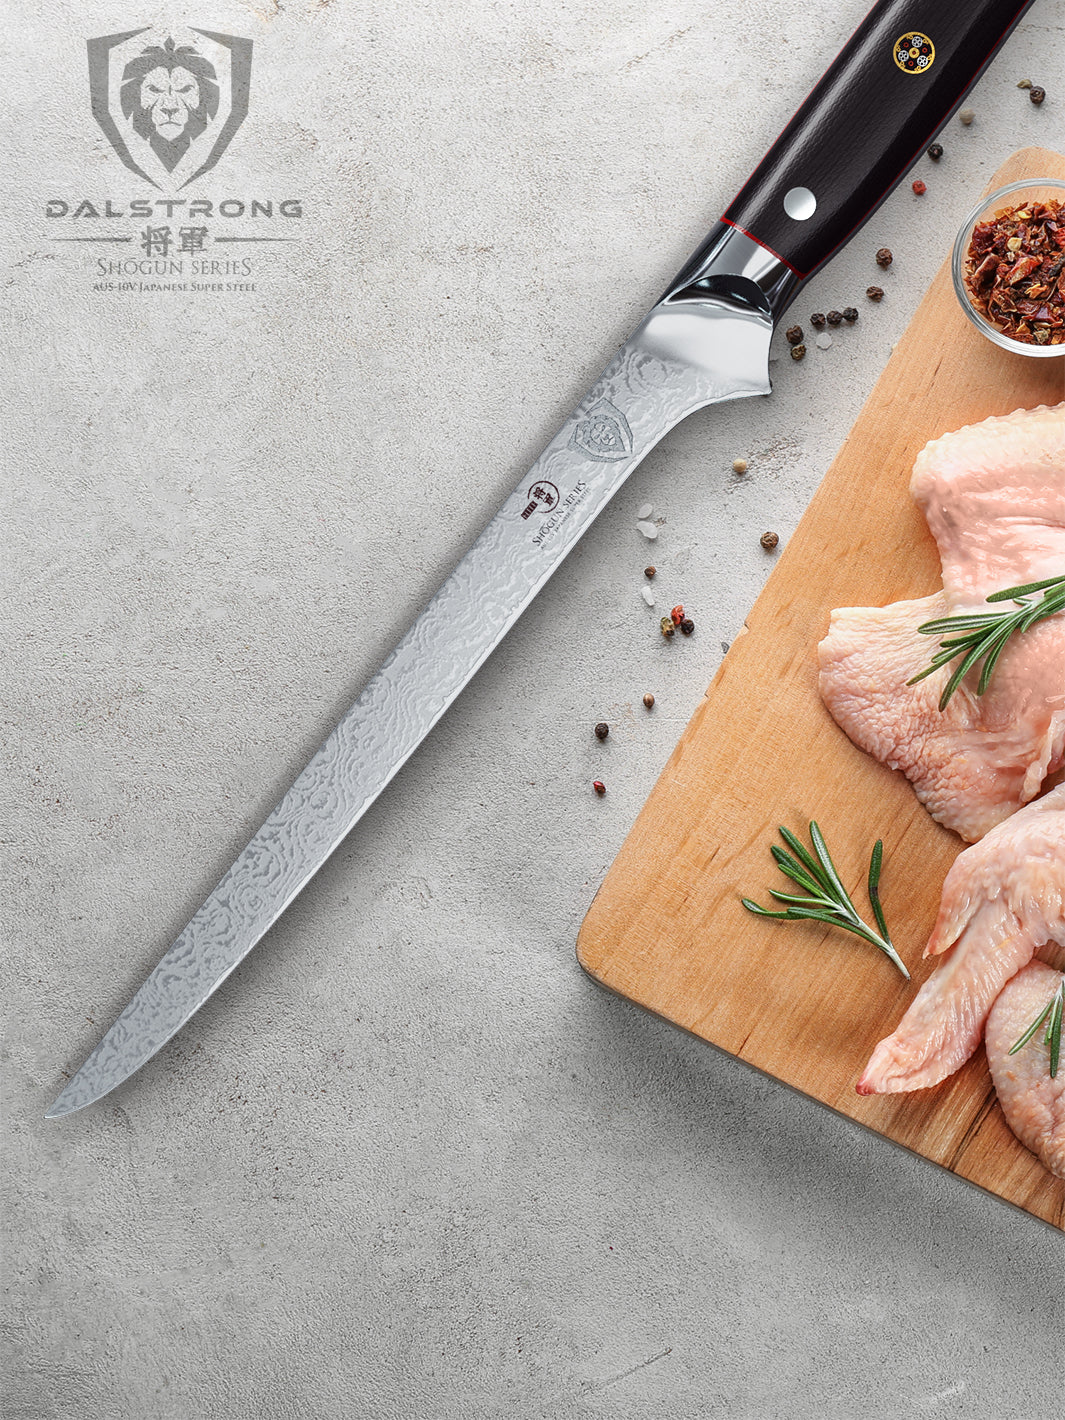 Dalstrong shogun series 8 inch boning knife with black handle and two chicken wings on a wooden table.